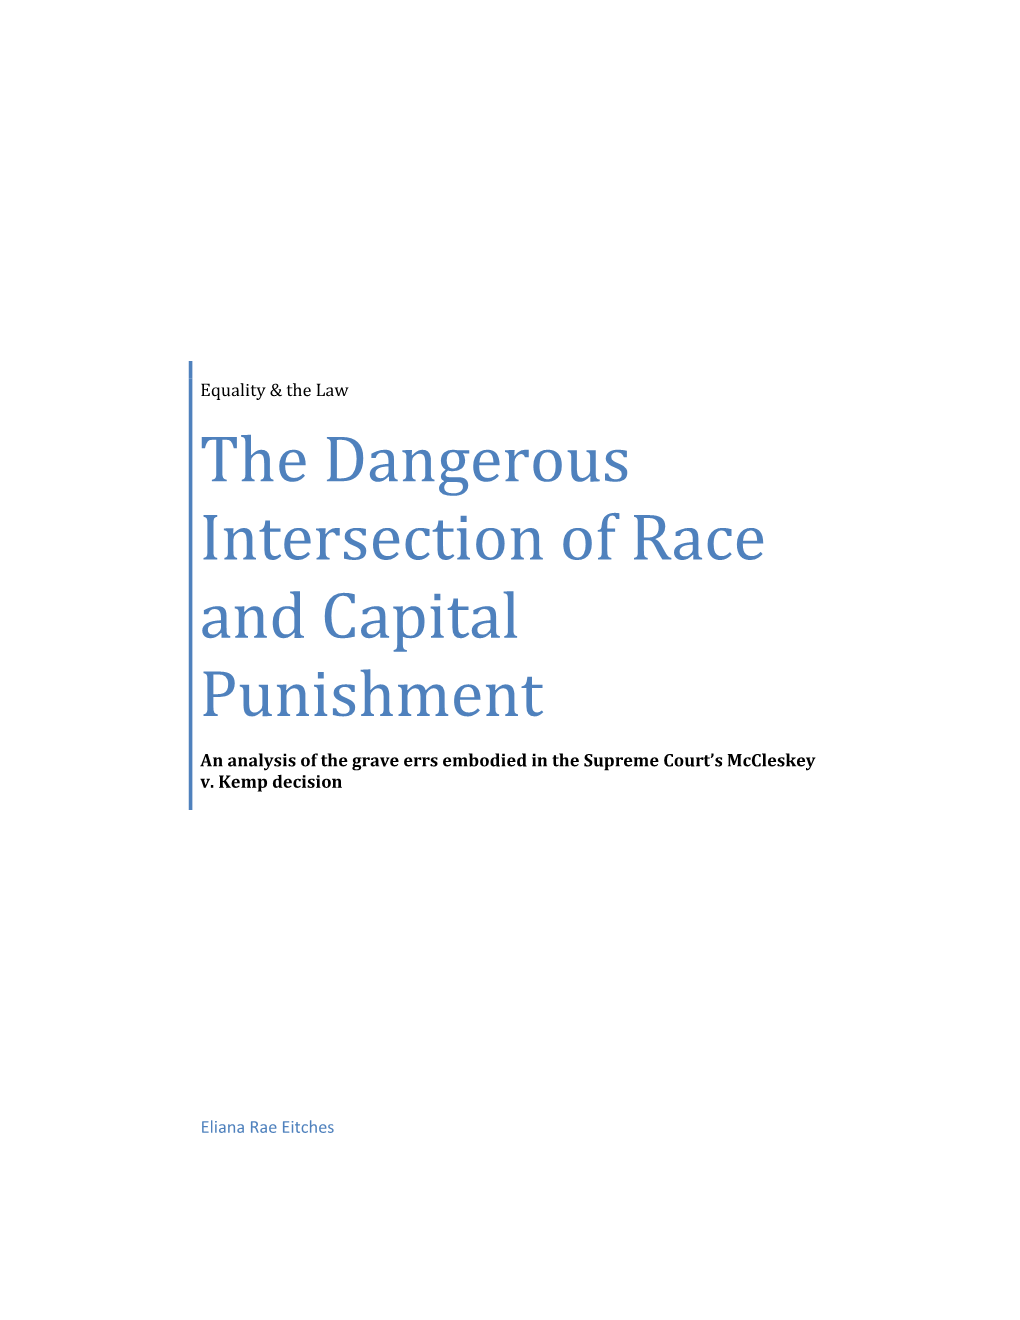 The Dangerous Intersection of Race and Capital Punishment